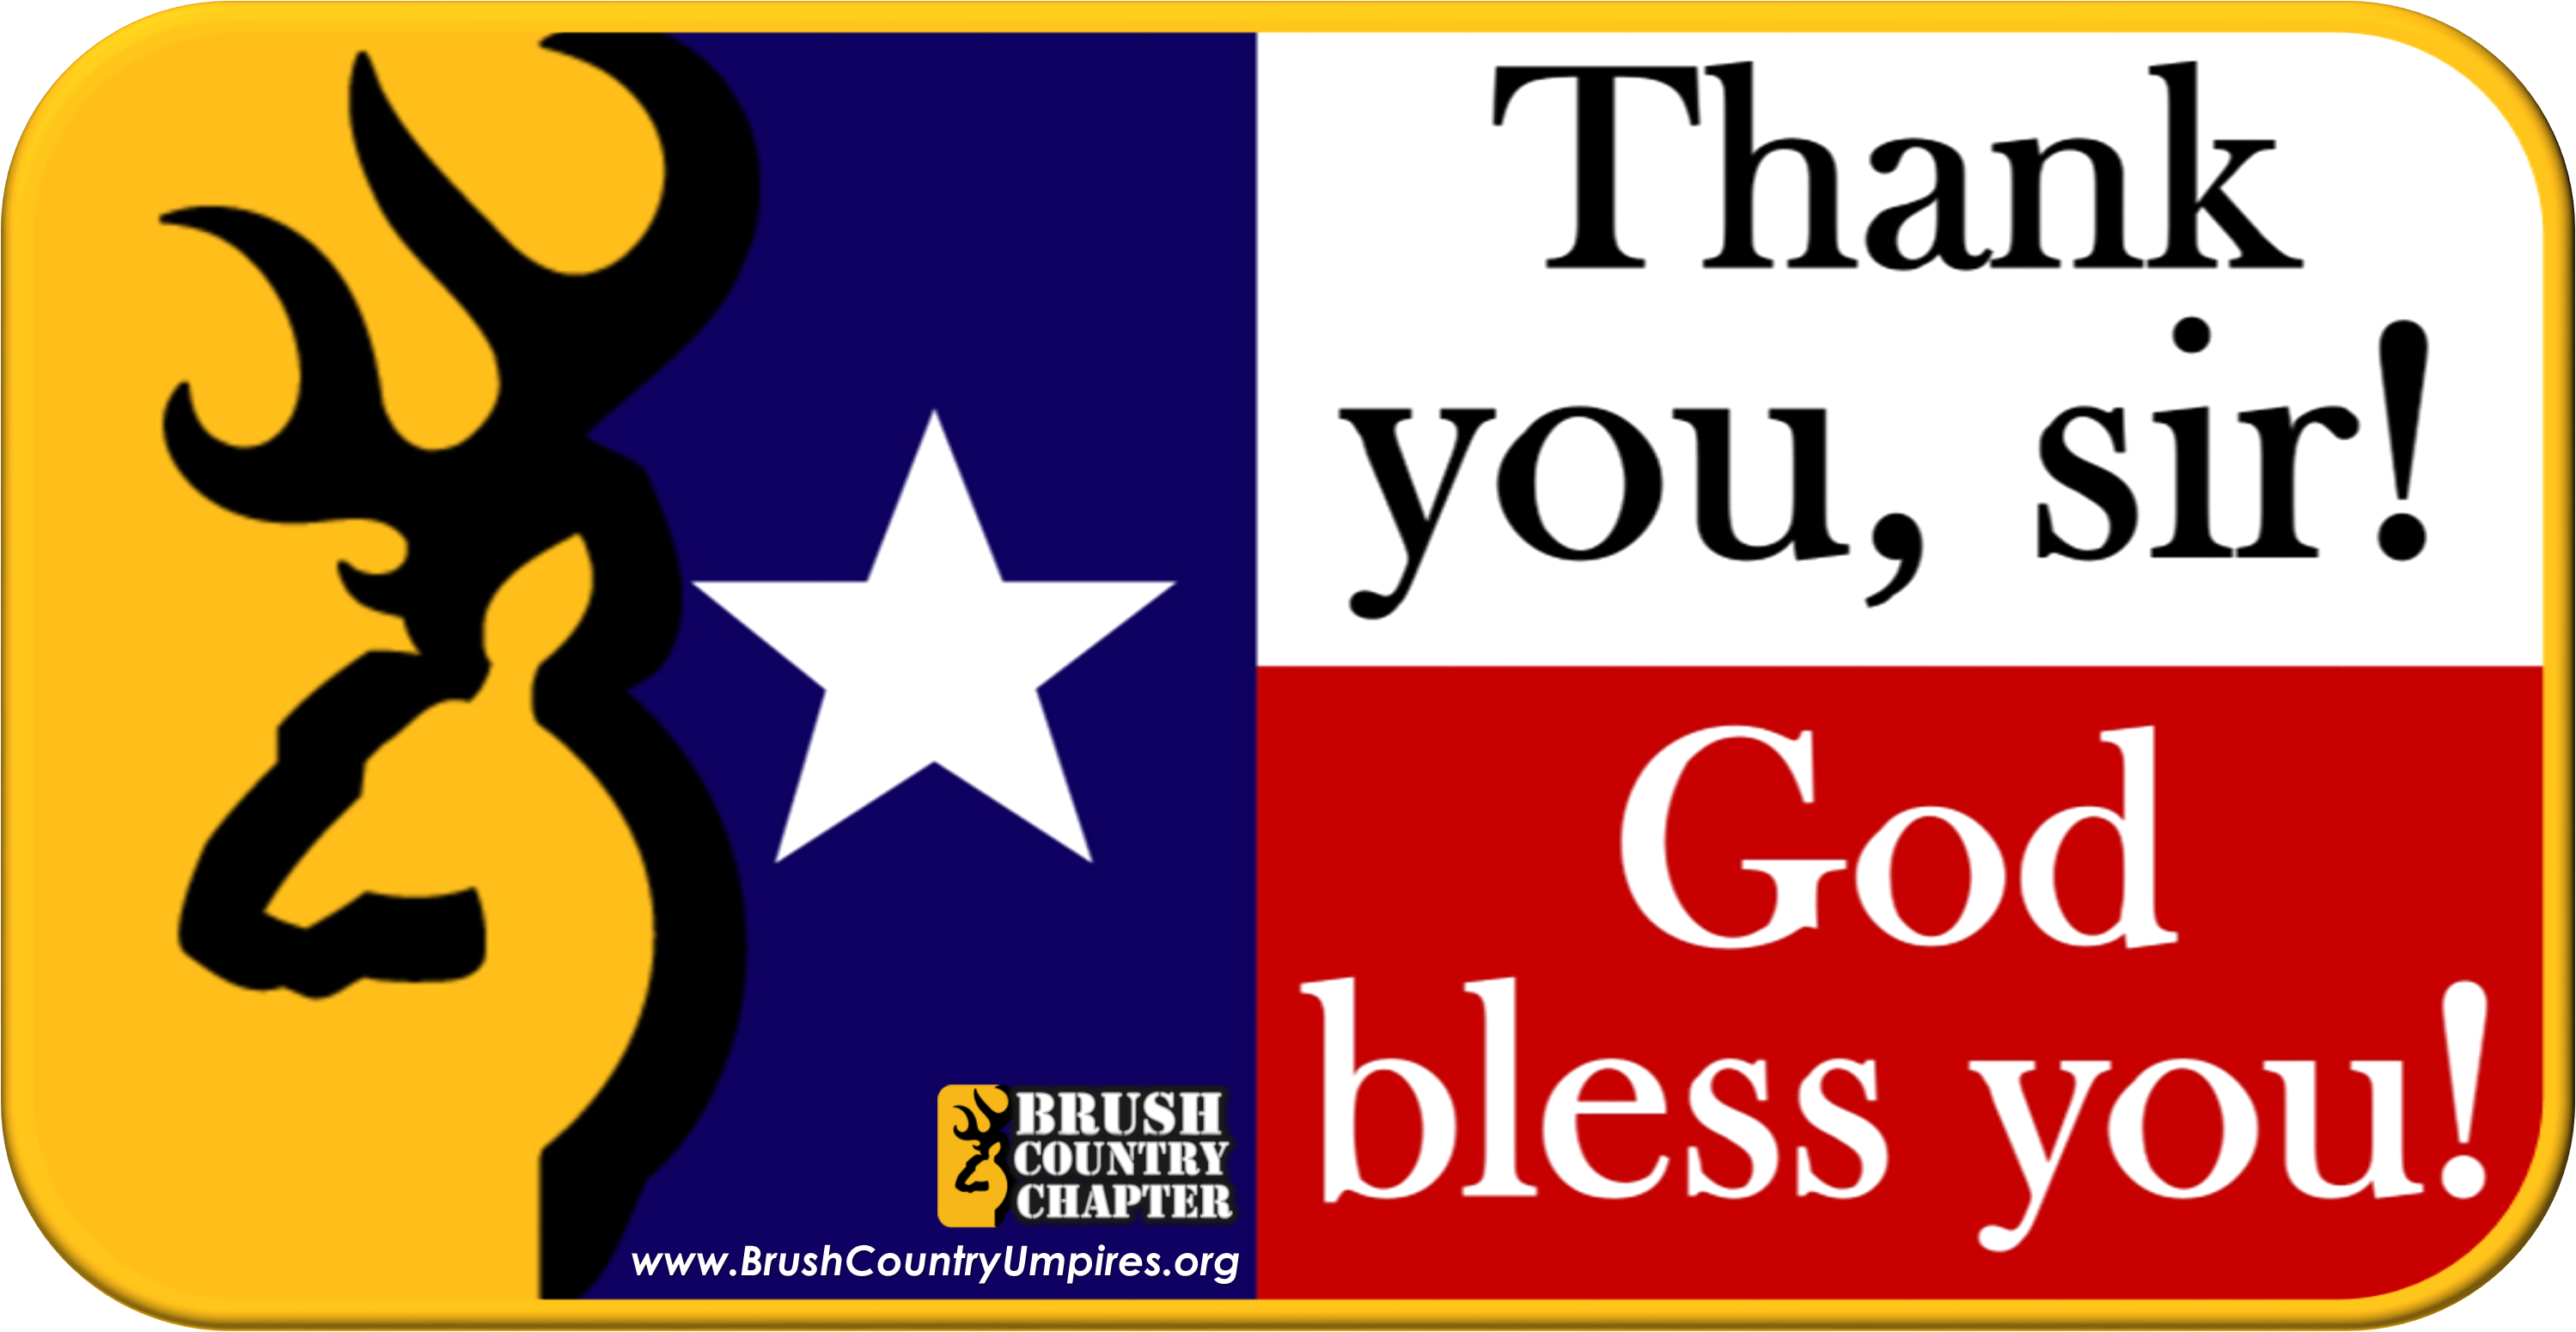 TY Thank You - Thank You Texas Flag White God Bless You Browning Gold Chapter PNG │ BrushCountryUmpires.org TASO Baseball Chapter GotLifeQuestions.com #Umpire (2.0.0).png